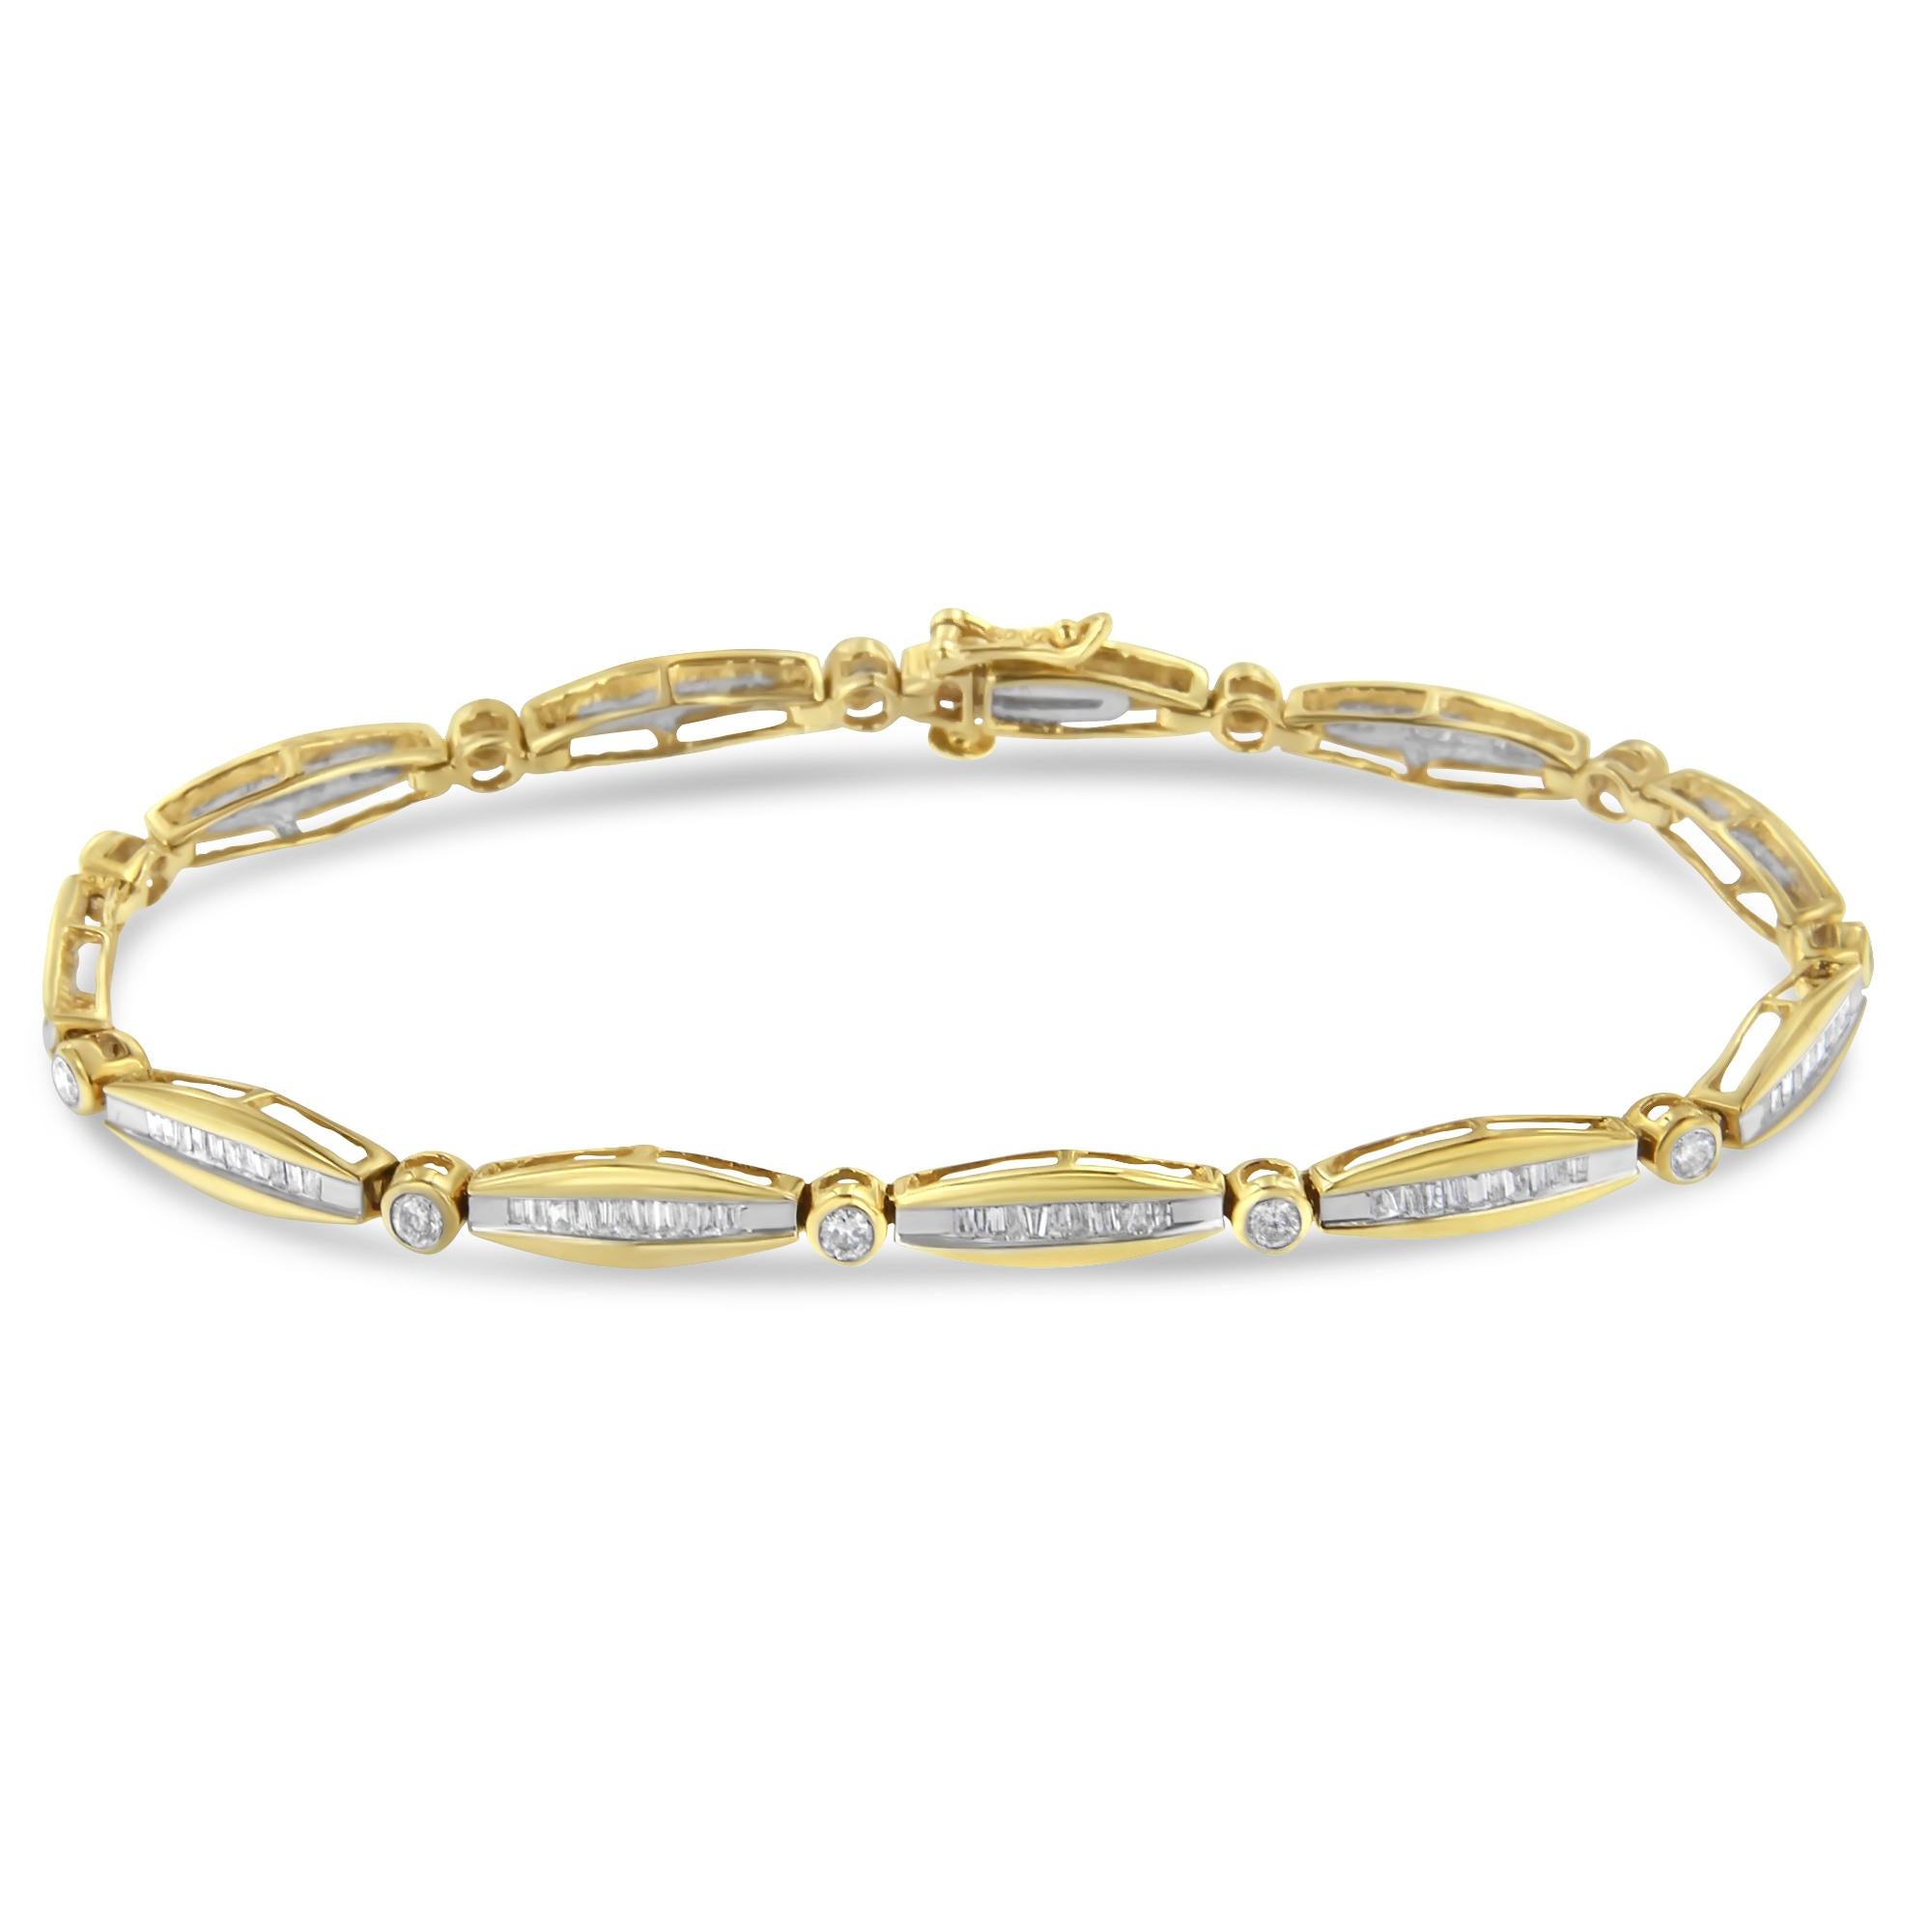 Fashioned in 14k yellow gold, this gorgeous, yet slender bracelet twinkles with long baguette diamonds inlaid into gold links alternating with smaller round links that showcase sparkling round cut, bezel set diamonds. 1 1/2 ct. dw. of diamonds make